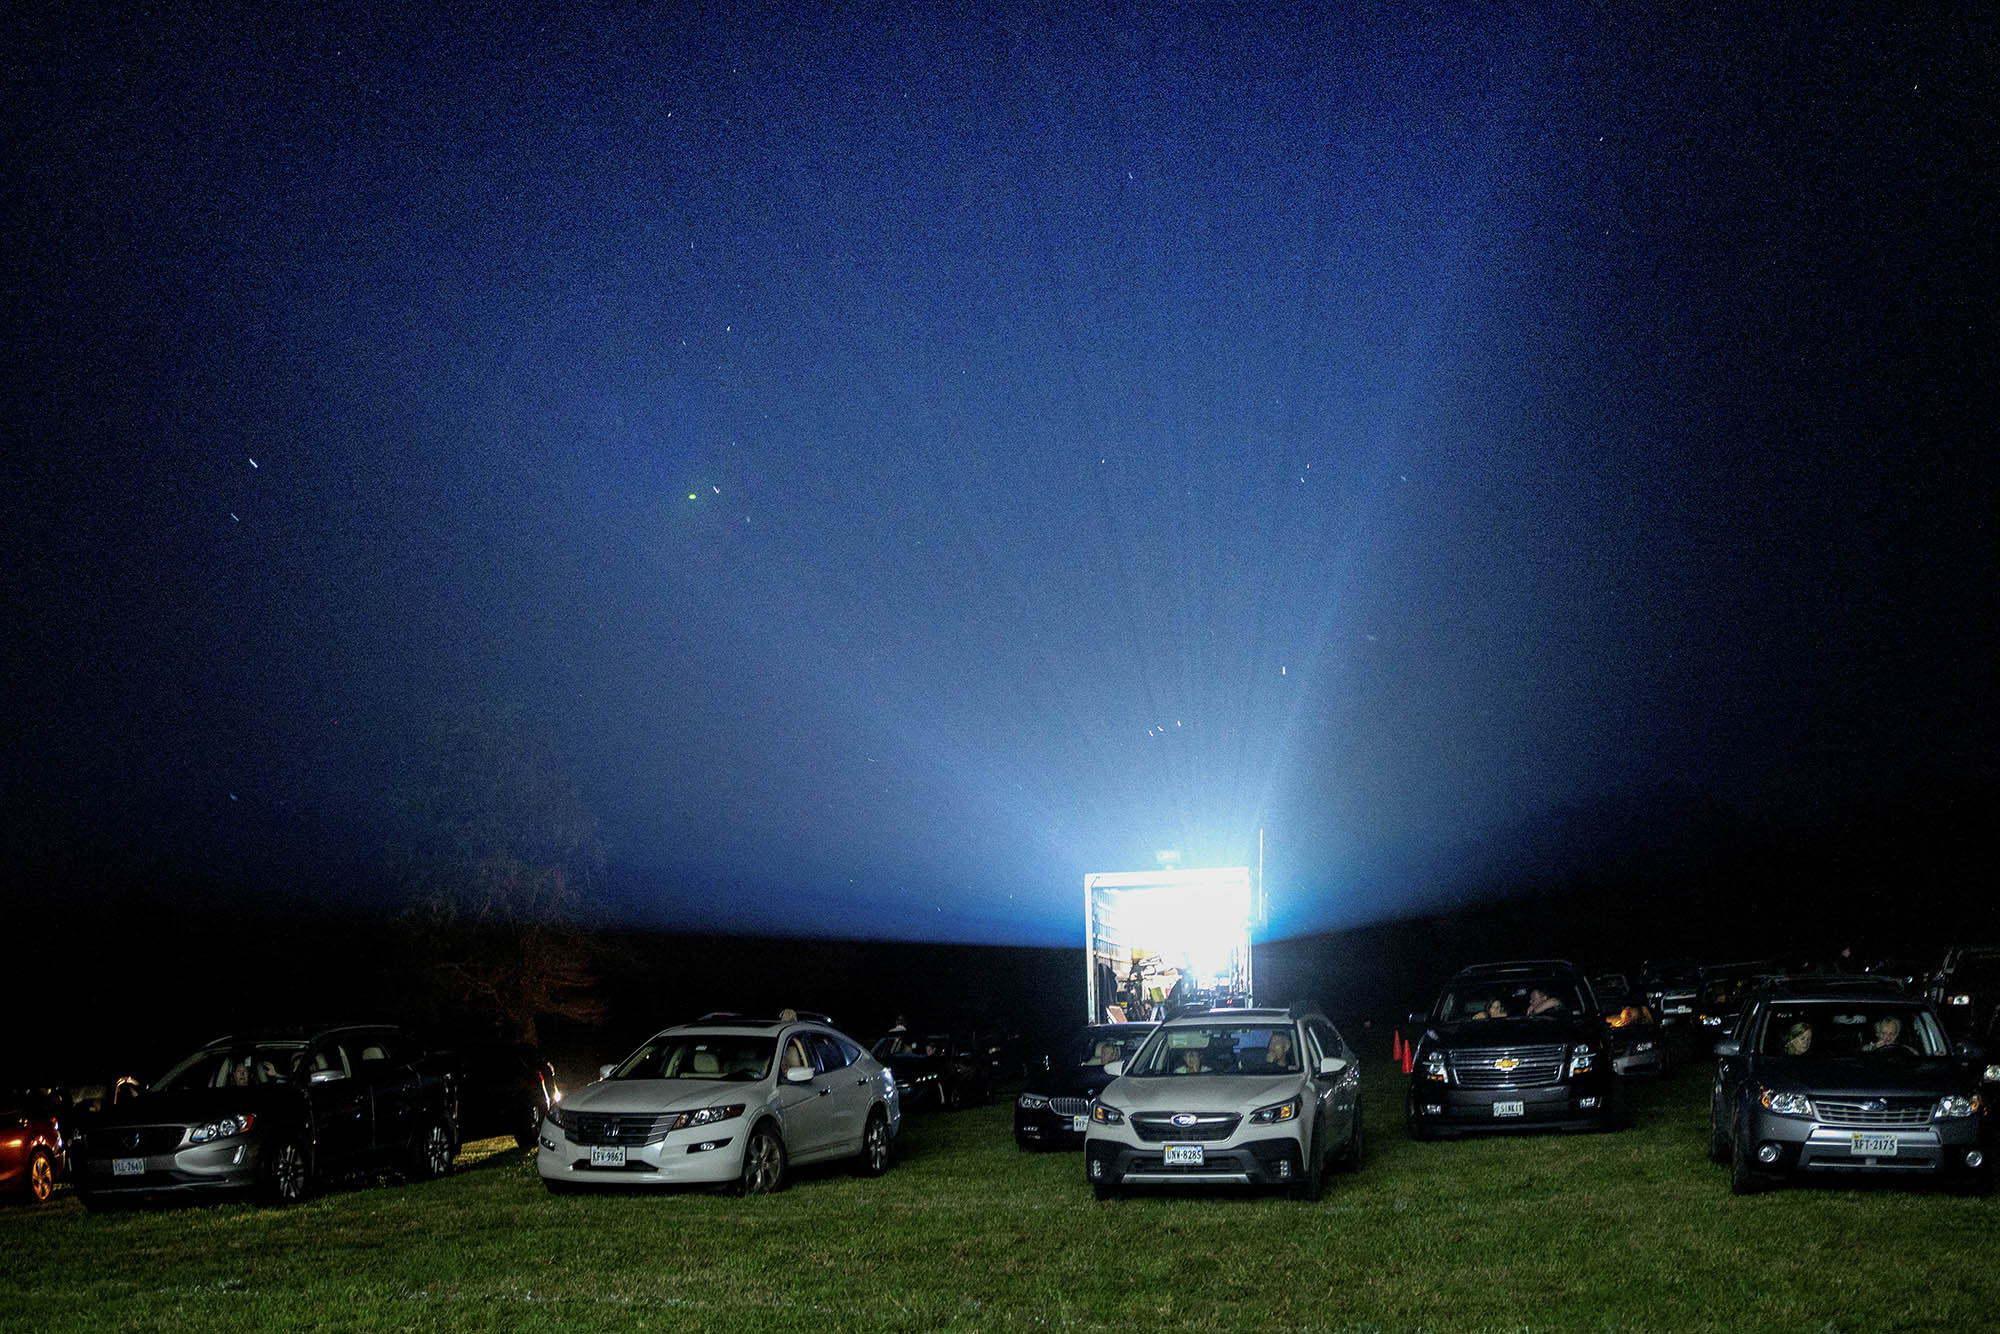 Vehicles lined up in a field as the drive-in movie projector shines bright out of a trailer 